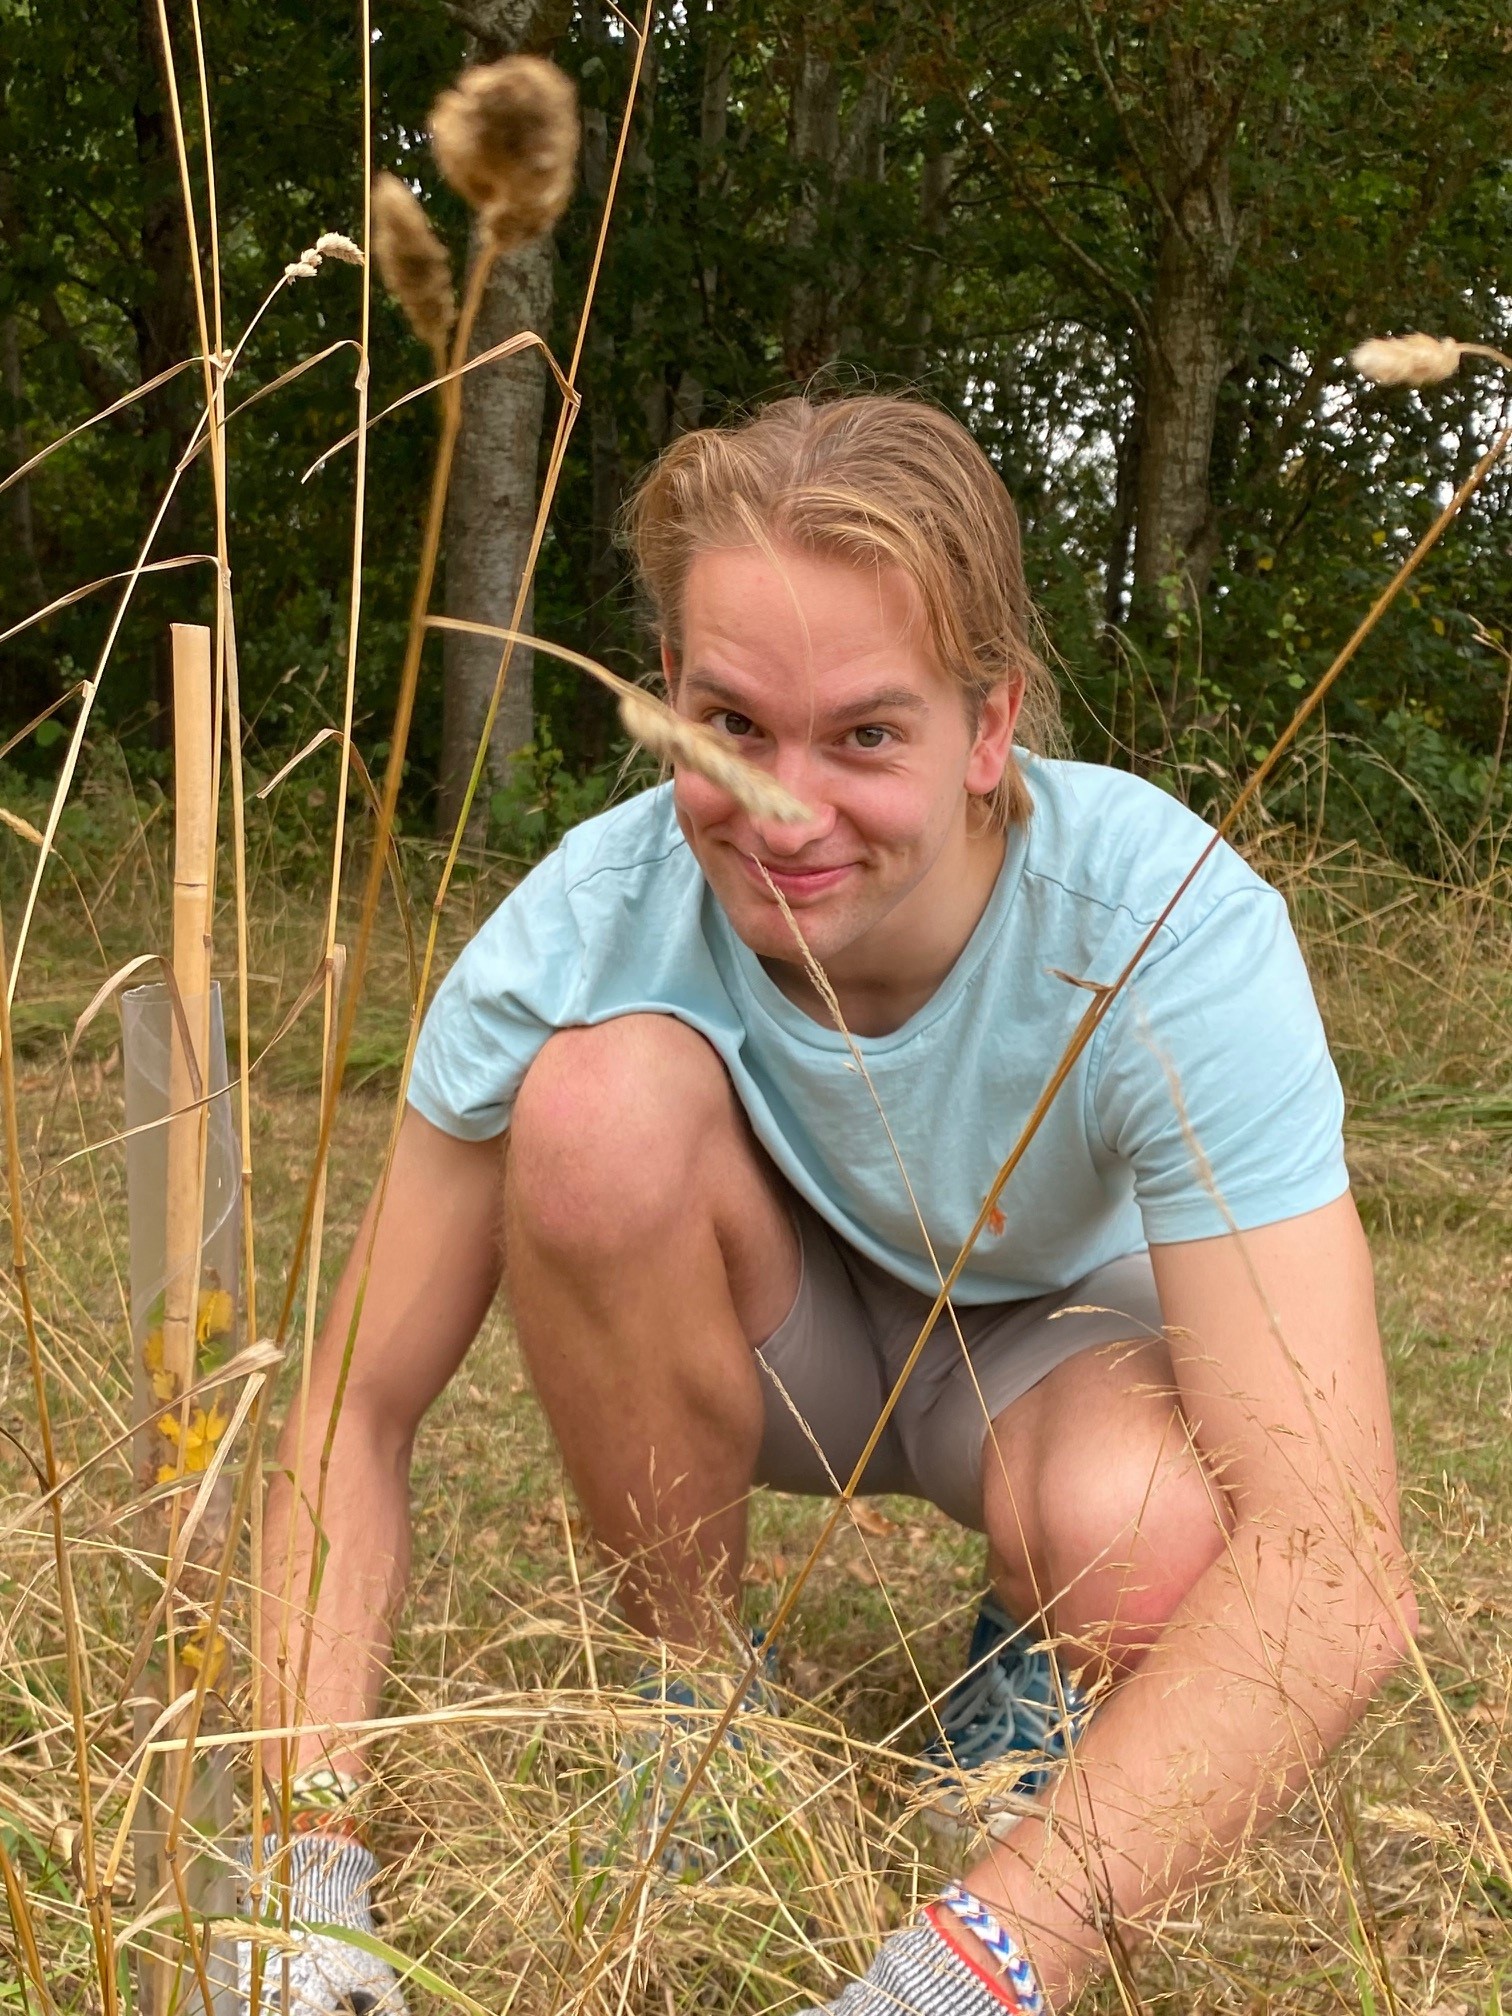 A young man with dark blonde hair pulled back in a ponytail, wearing a pale blue tshirt, khaki shorts, and grey gloves, crouches down in tall yellow-green grass beside a sapling tree. He is looking directly at the camera with a grin.